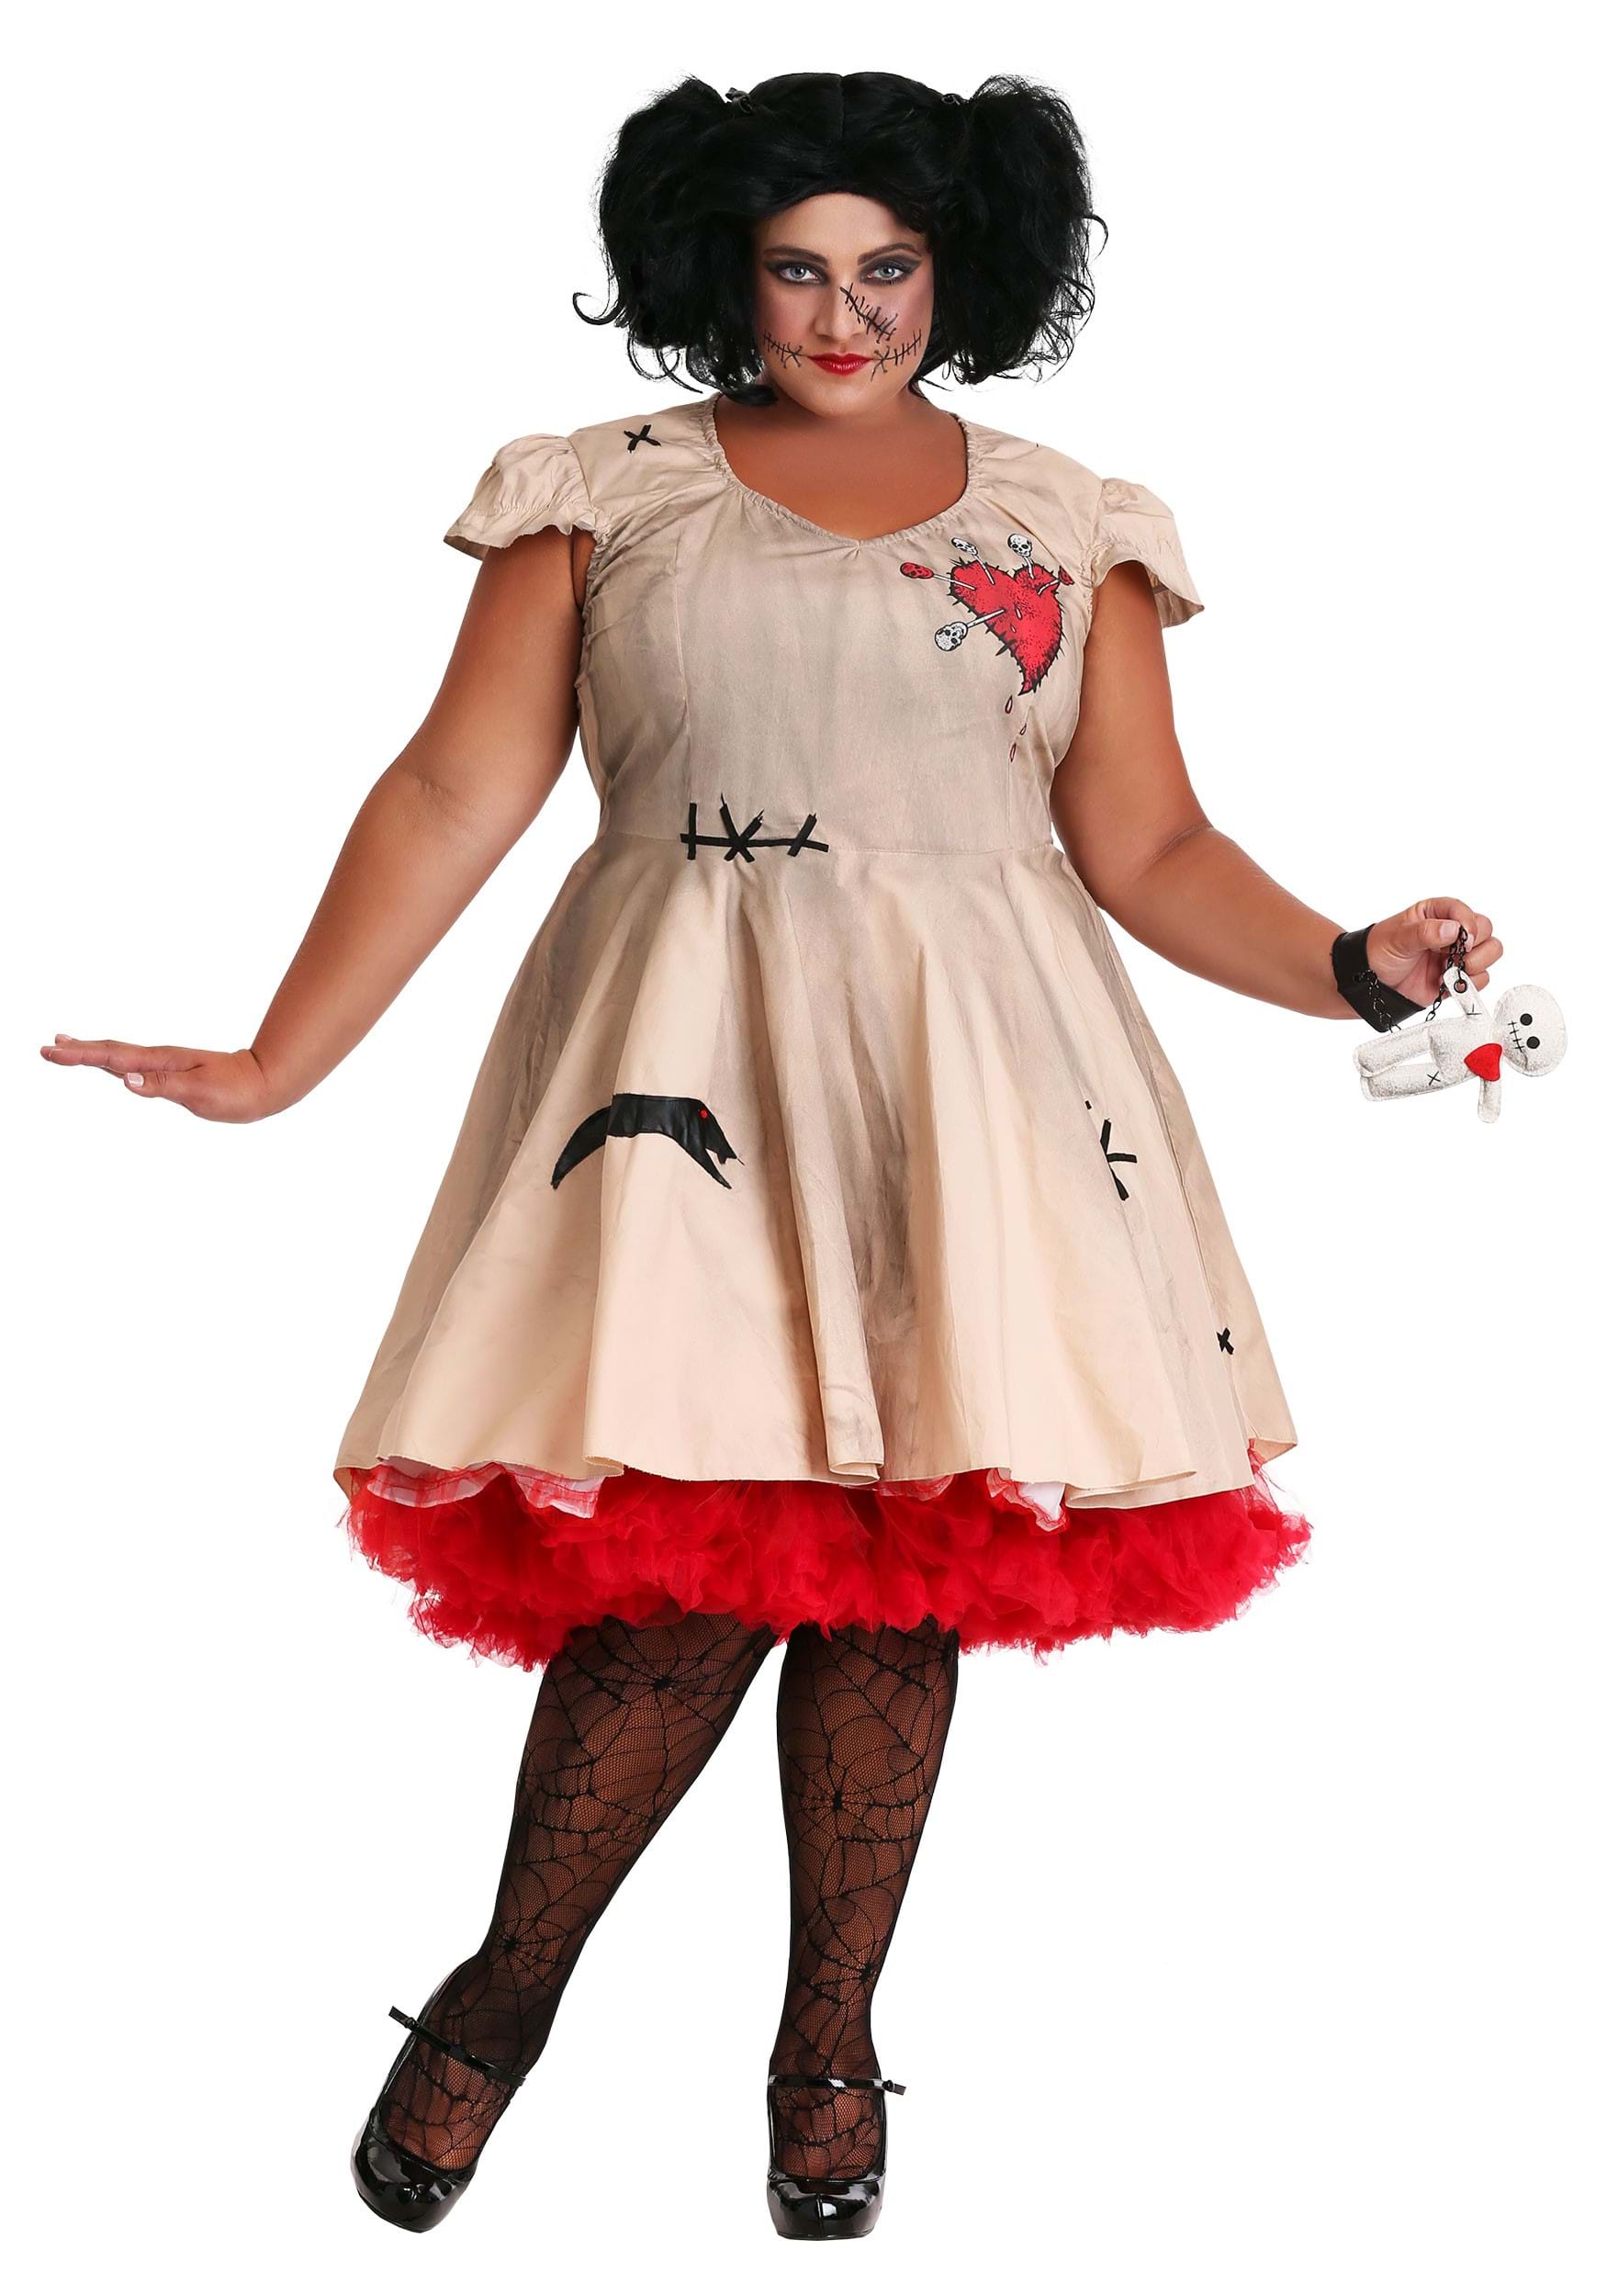 Halloweencostumes.com Work It Out 80's Women's Plus Size Costume : Target